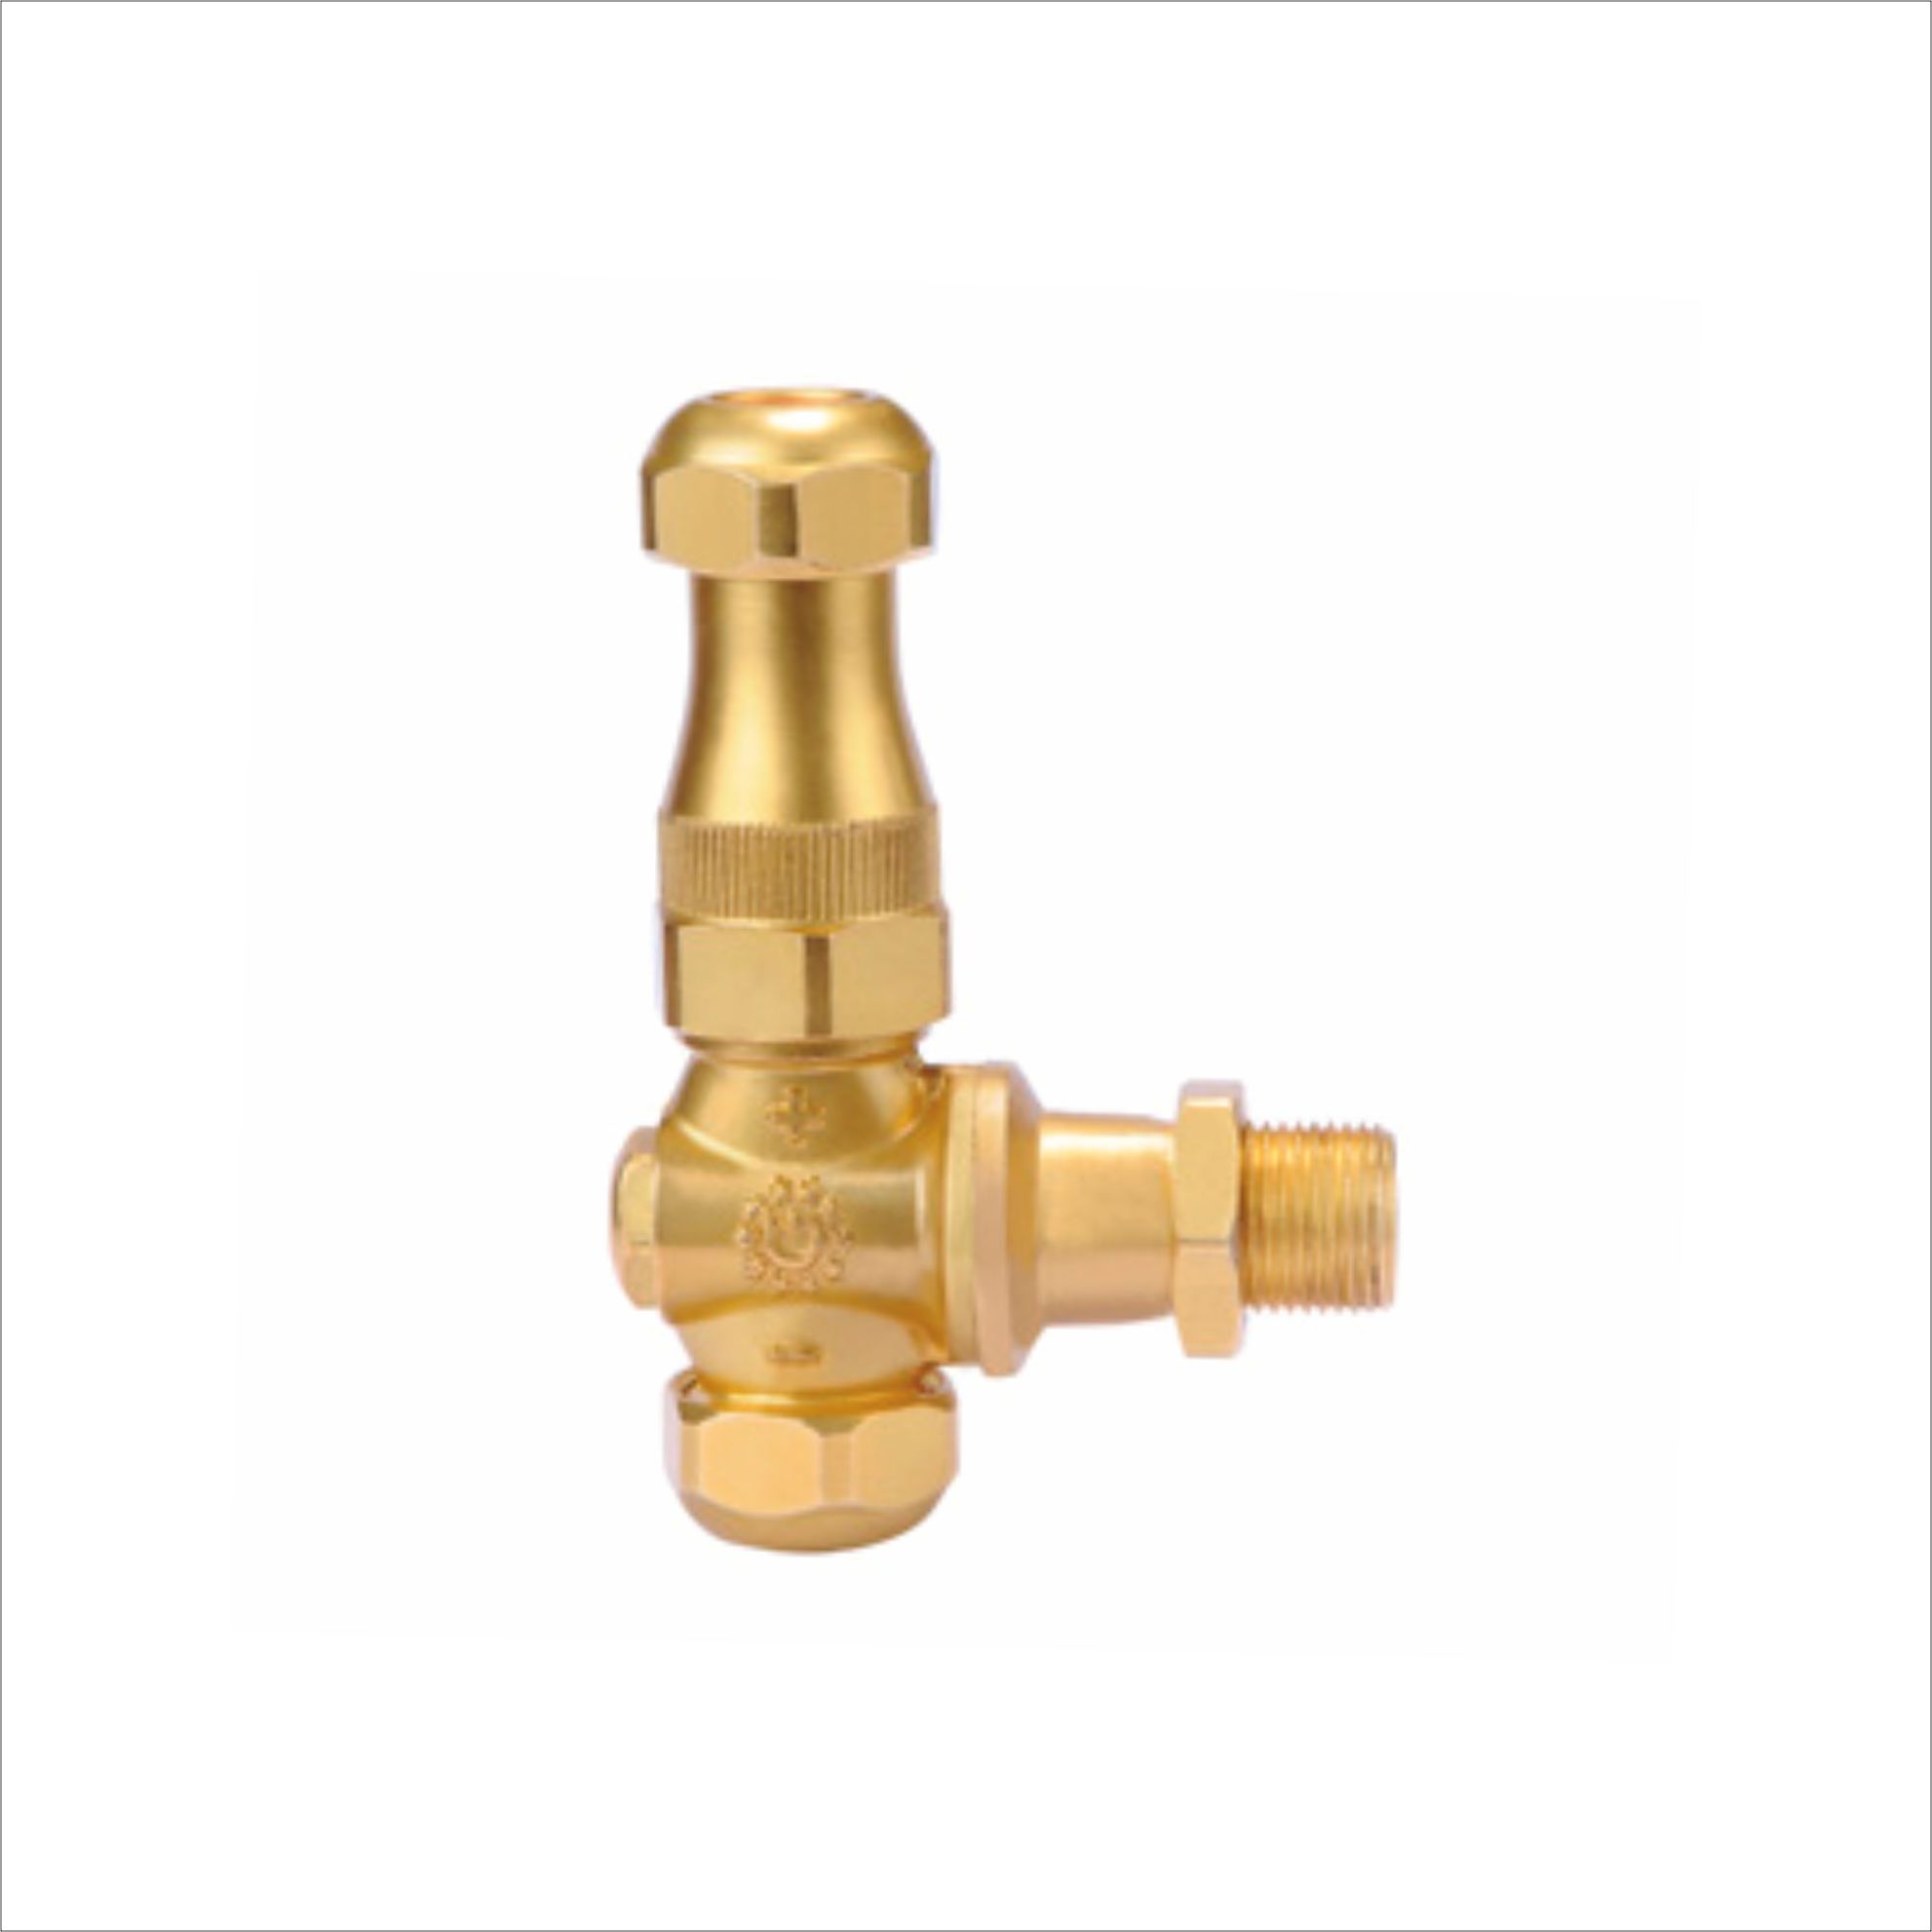 ADJUSTABLE BRASS NOZZLE 2 WAYS (WITHOUT ANTIDRIP)